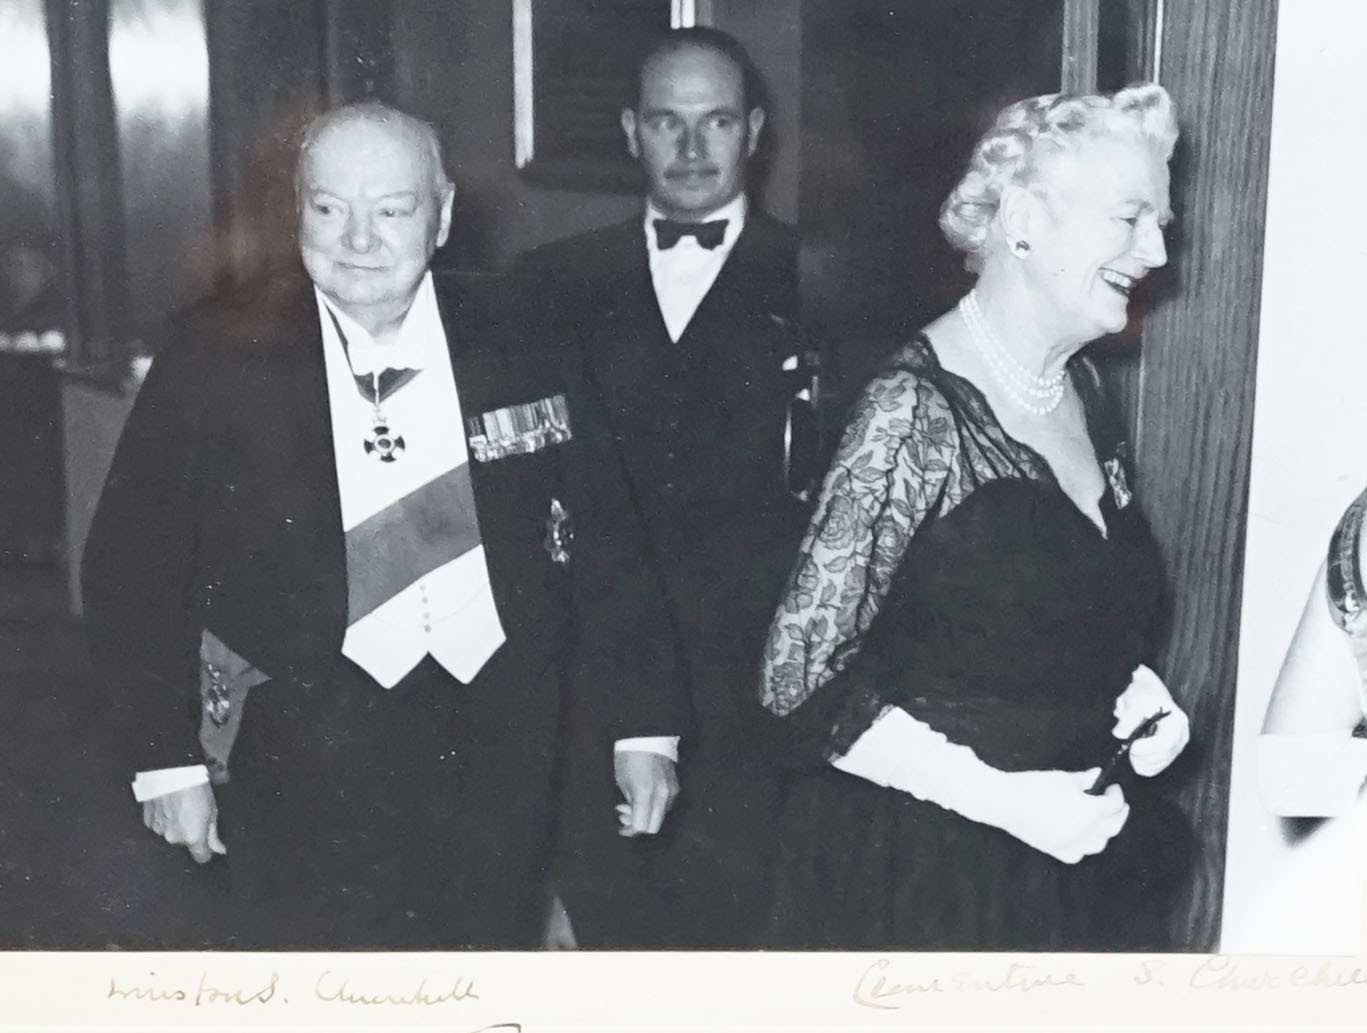 A signed photograph of Sir Winston Churchill and his wife Clementine taken 20th April 1956 at The St James Hawkey Hall, Woodford Green. Overall 17.5 x 22.5 cm